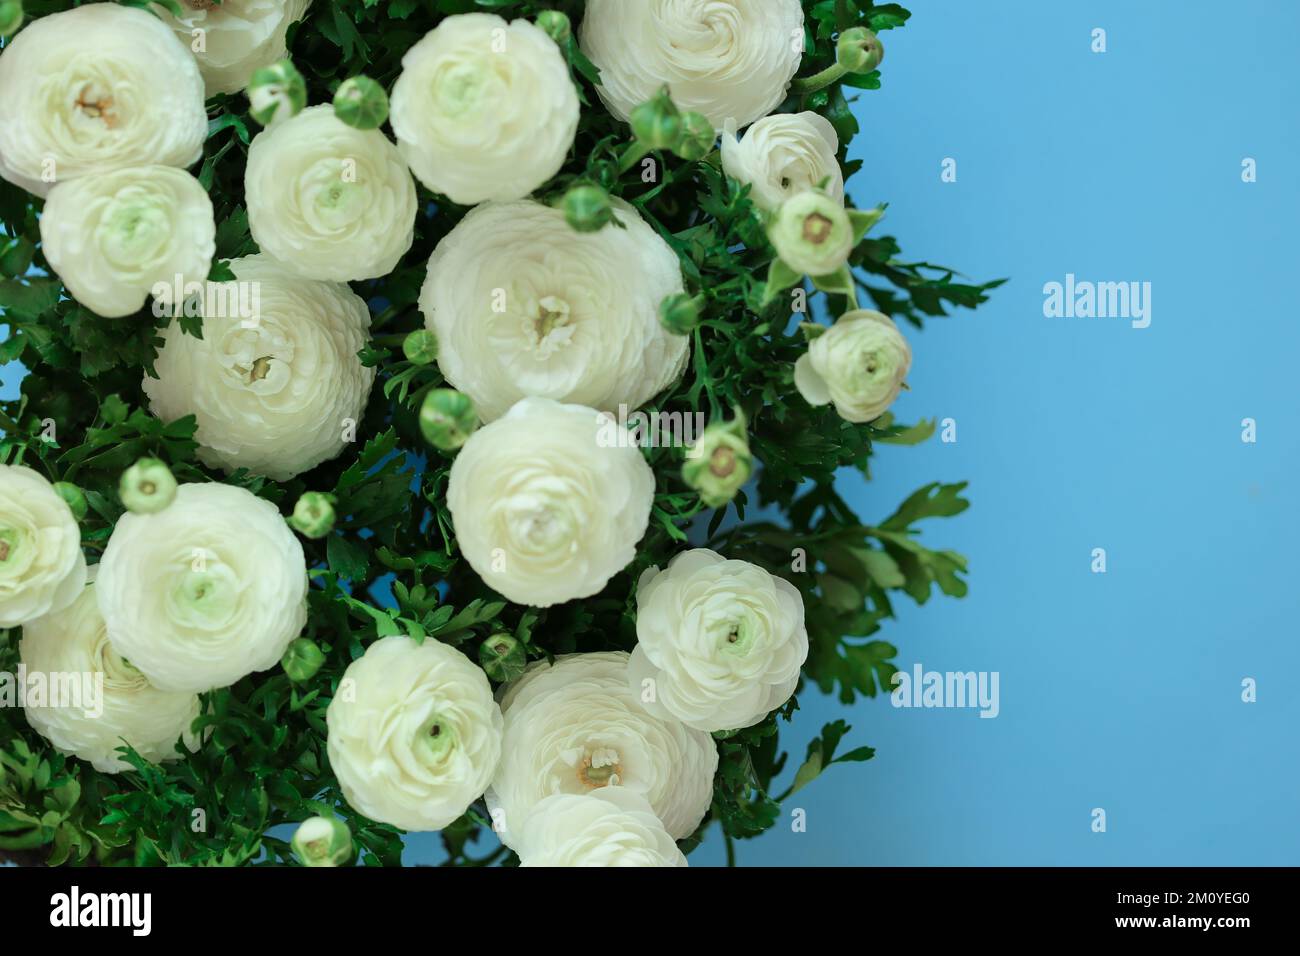 ranunculus flowers on blue background.buttercup flowers background. Floral card in white and blue colors.  Stock Photo